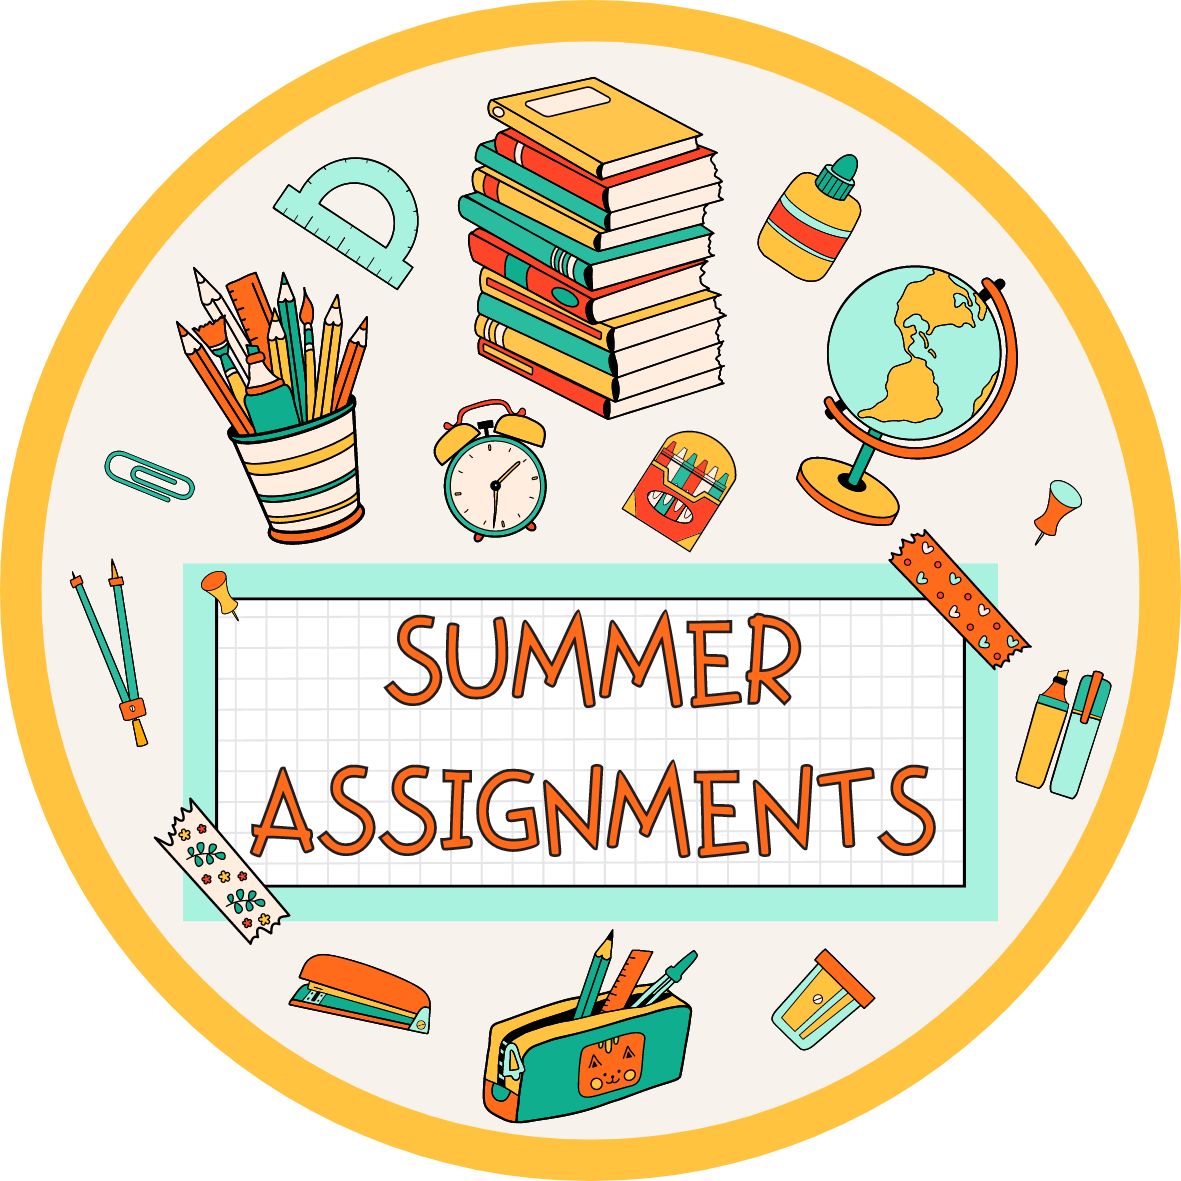 Summer Assignments - books and other school supplies and symbols